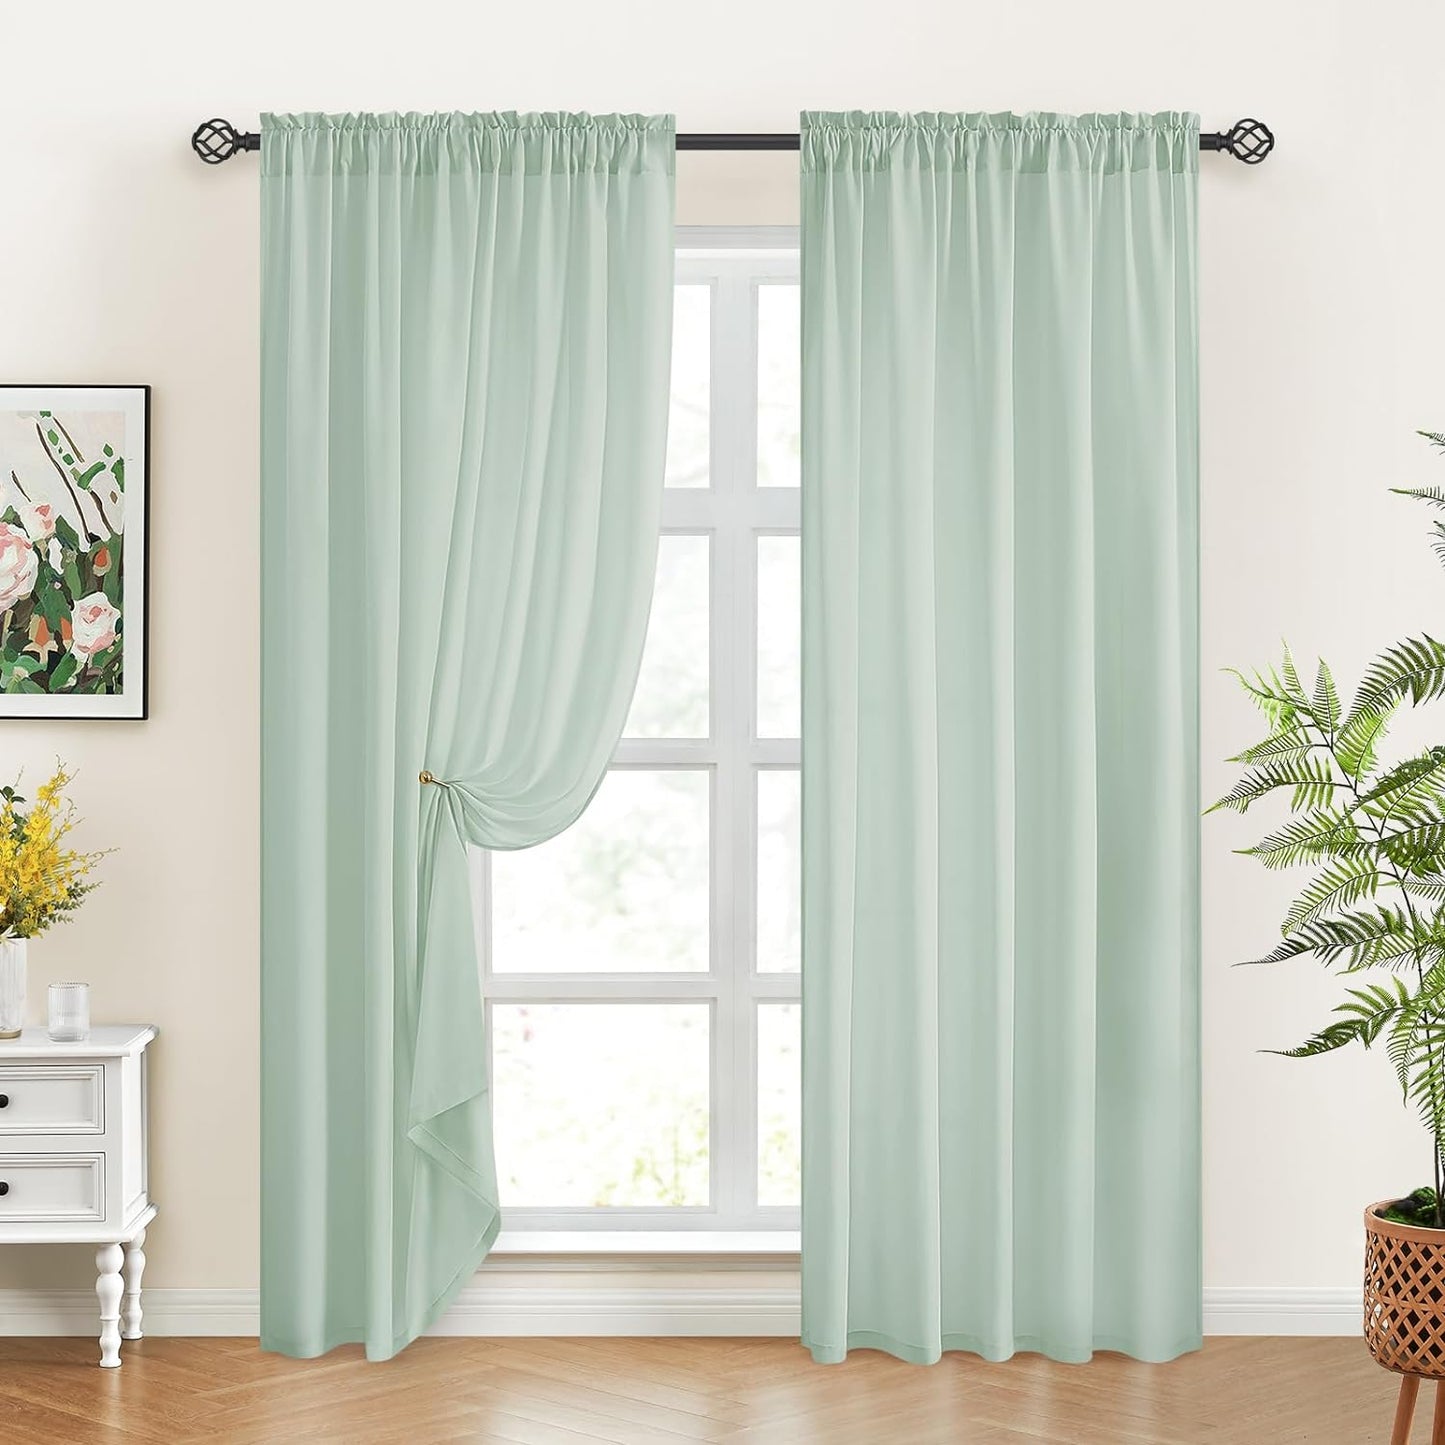 HOMEIDEAS Non-See-Through White Privacy Sheer Curtains 52 X 84 Inches Long 2 Panels Semi Sheer Curtains Light Filtering Window Curtains Drapes for Bedroom Living Room  HOMEIDEAS Sage Green W52" X L84" 